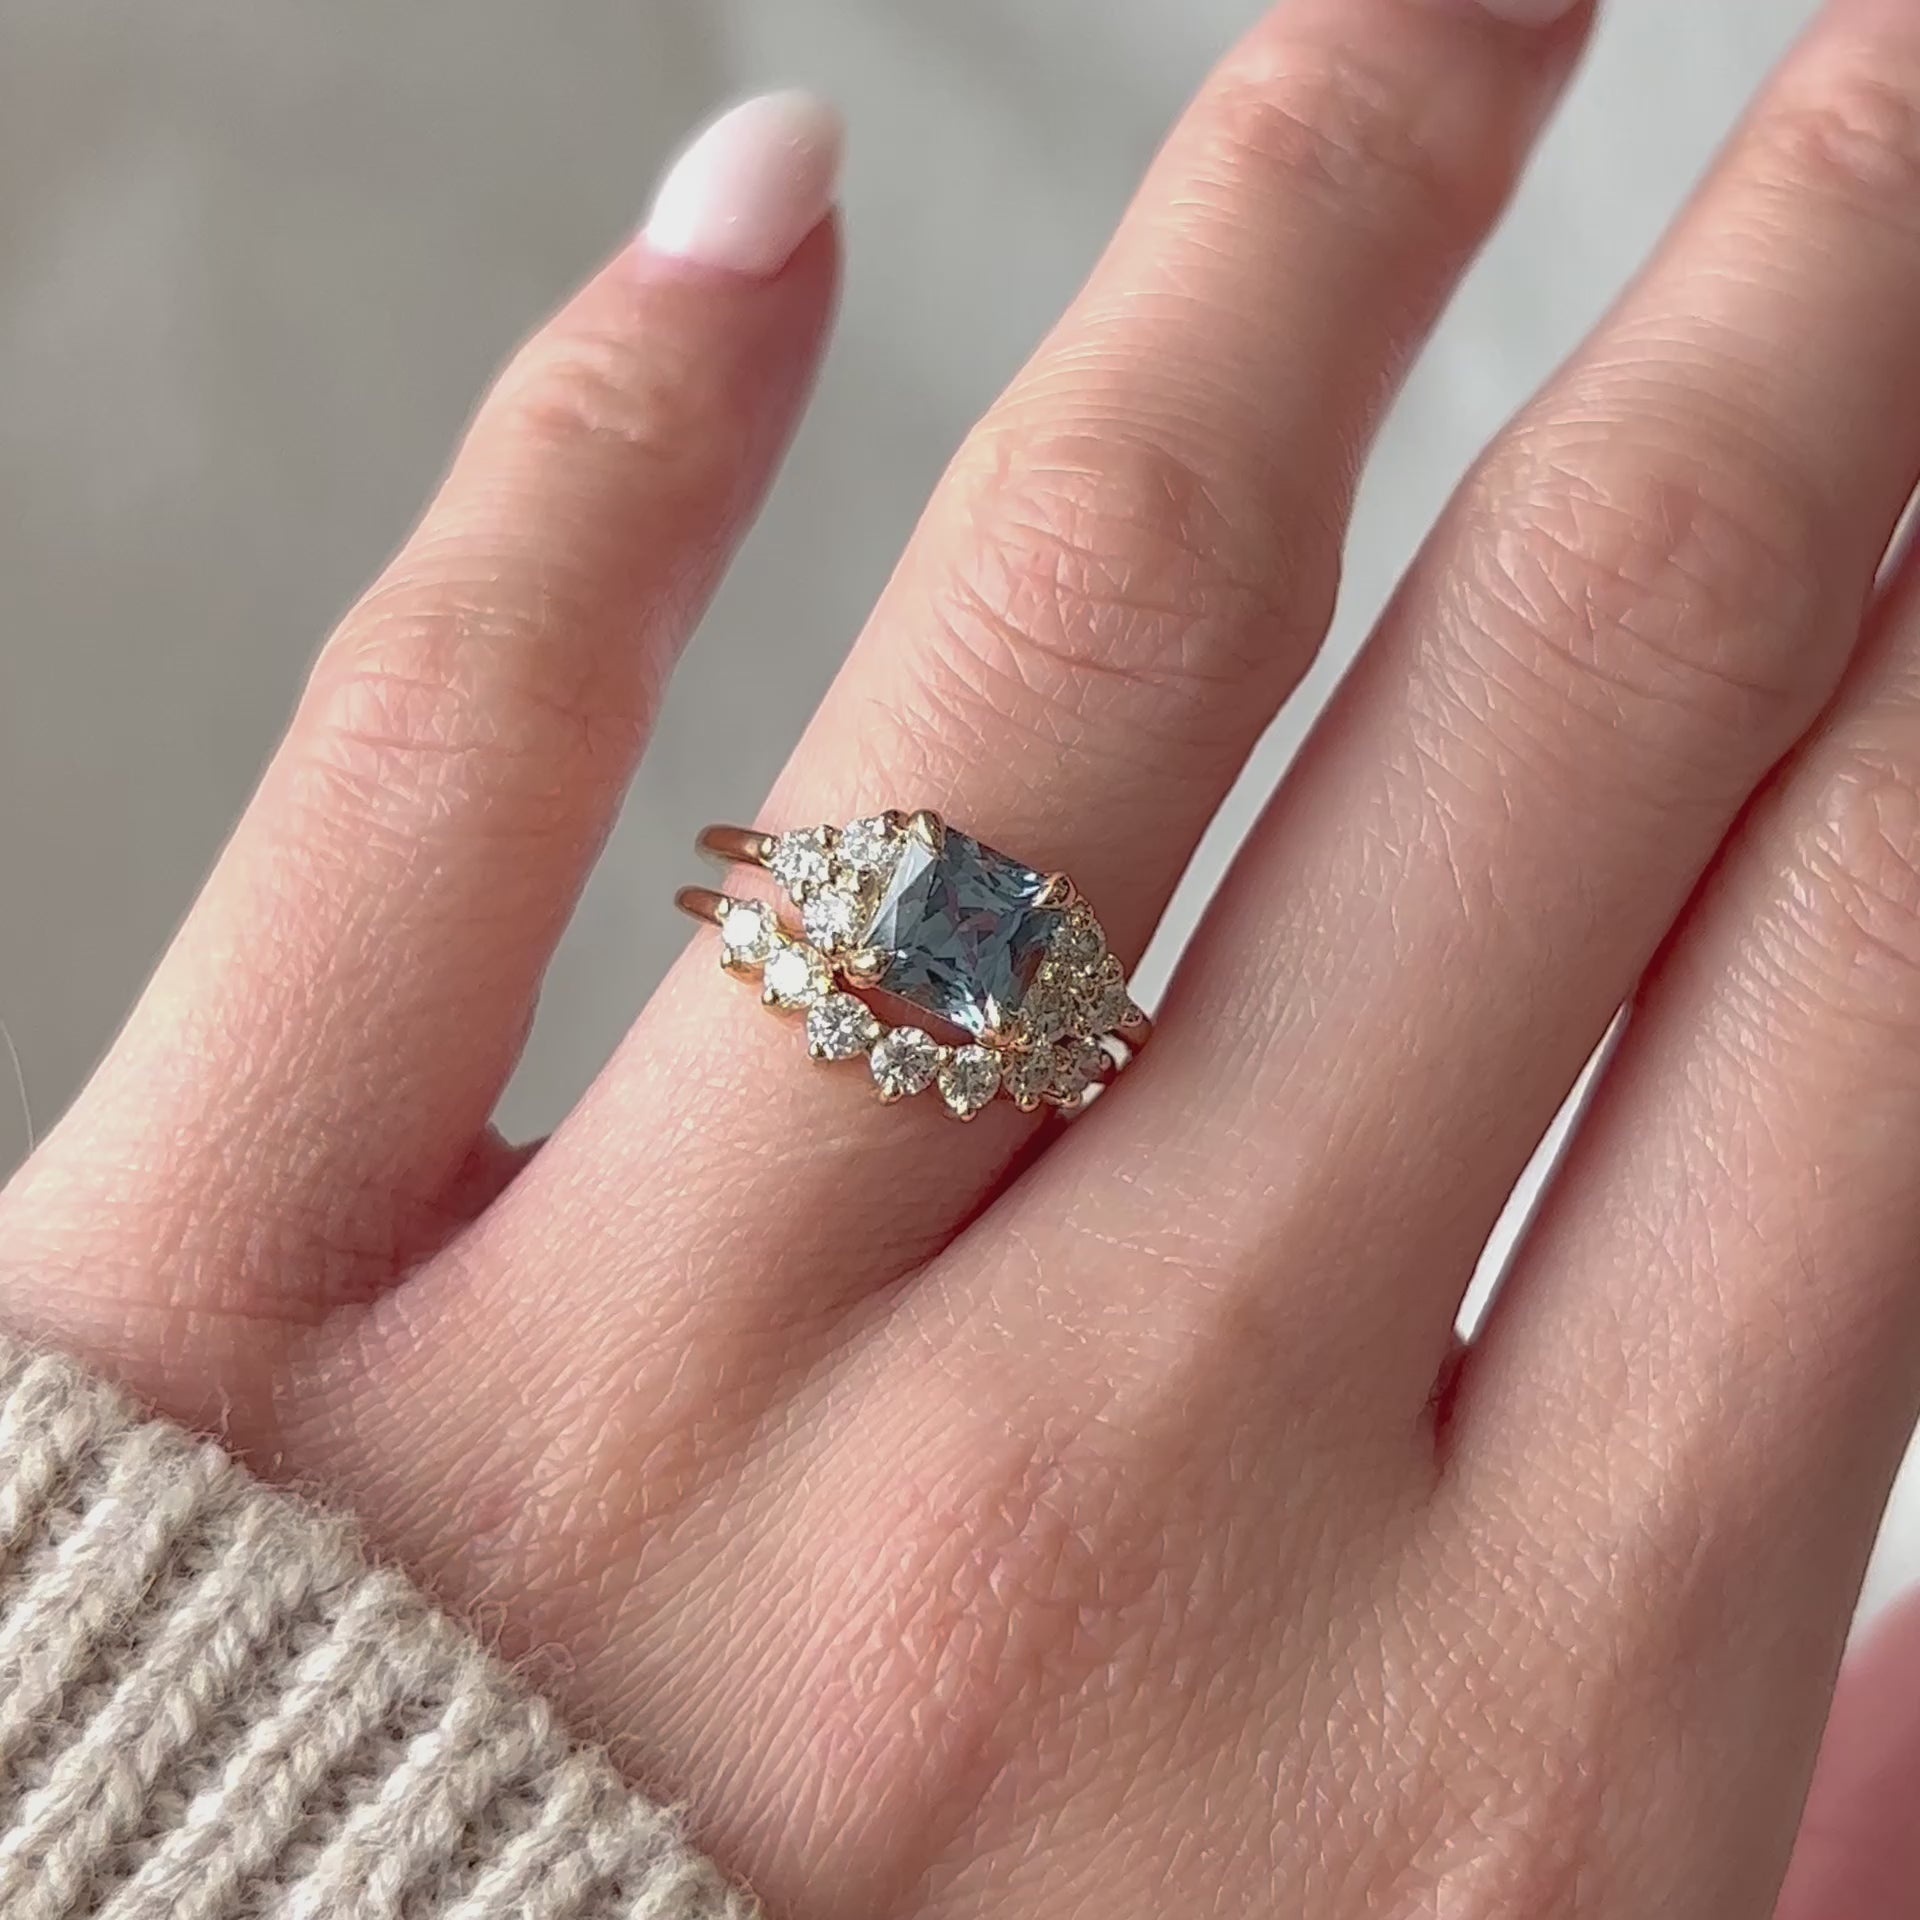 Video of Vintage 14k yellow gold light blue sapphire engagement ring worn with curved diamond wedding band